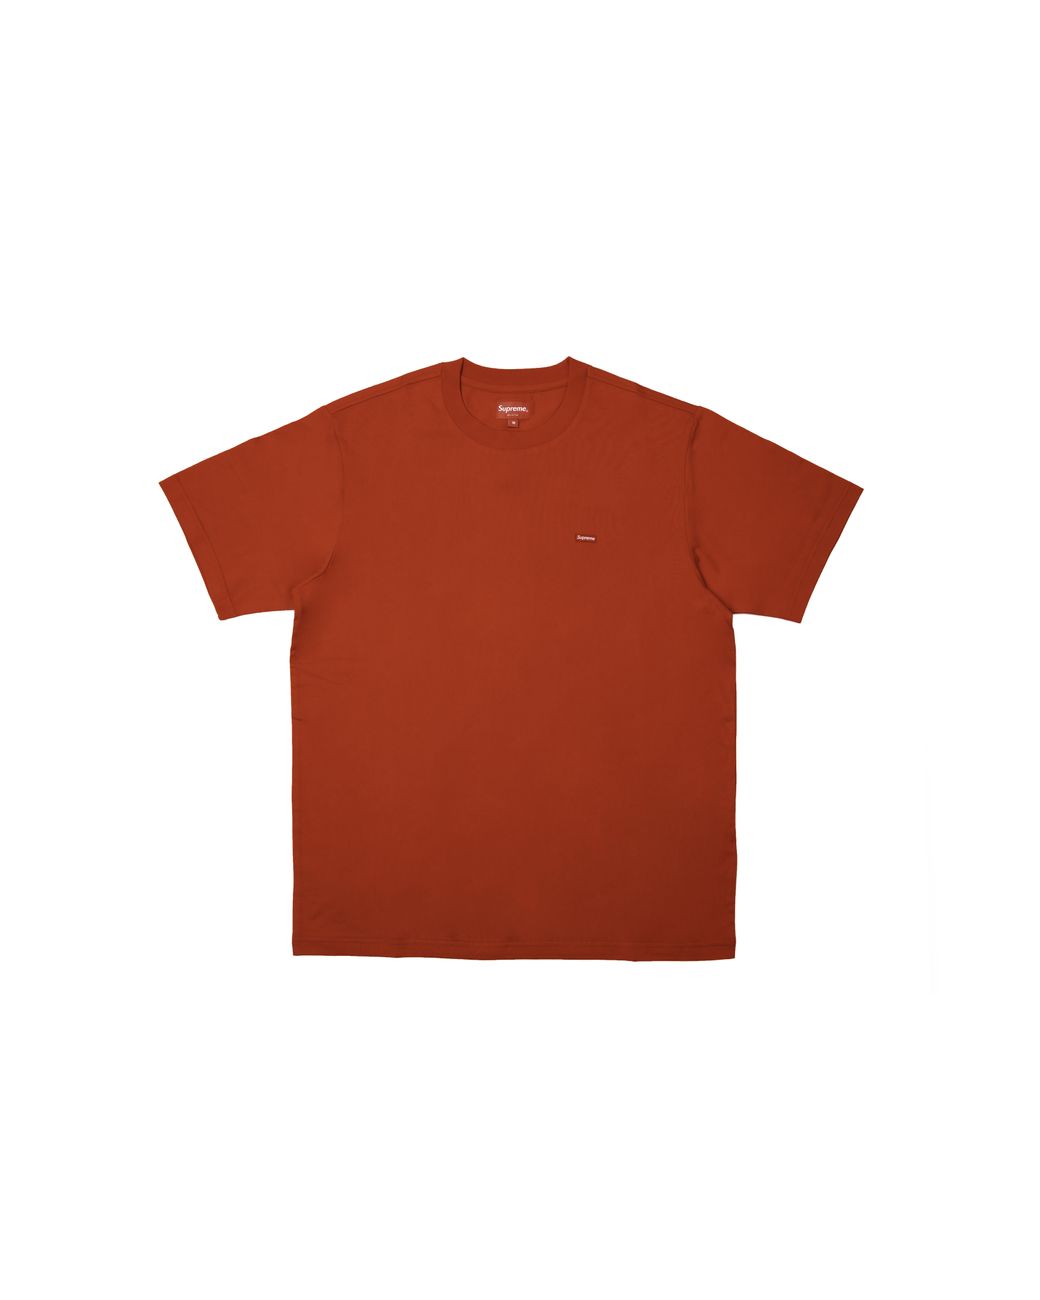 Supreme Small Box Tee (fw19) in Red for Men - Lyst